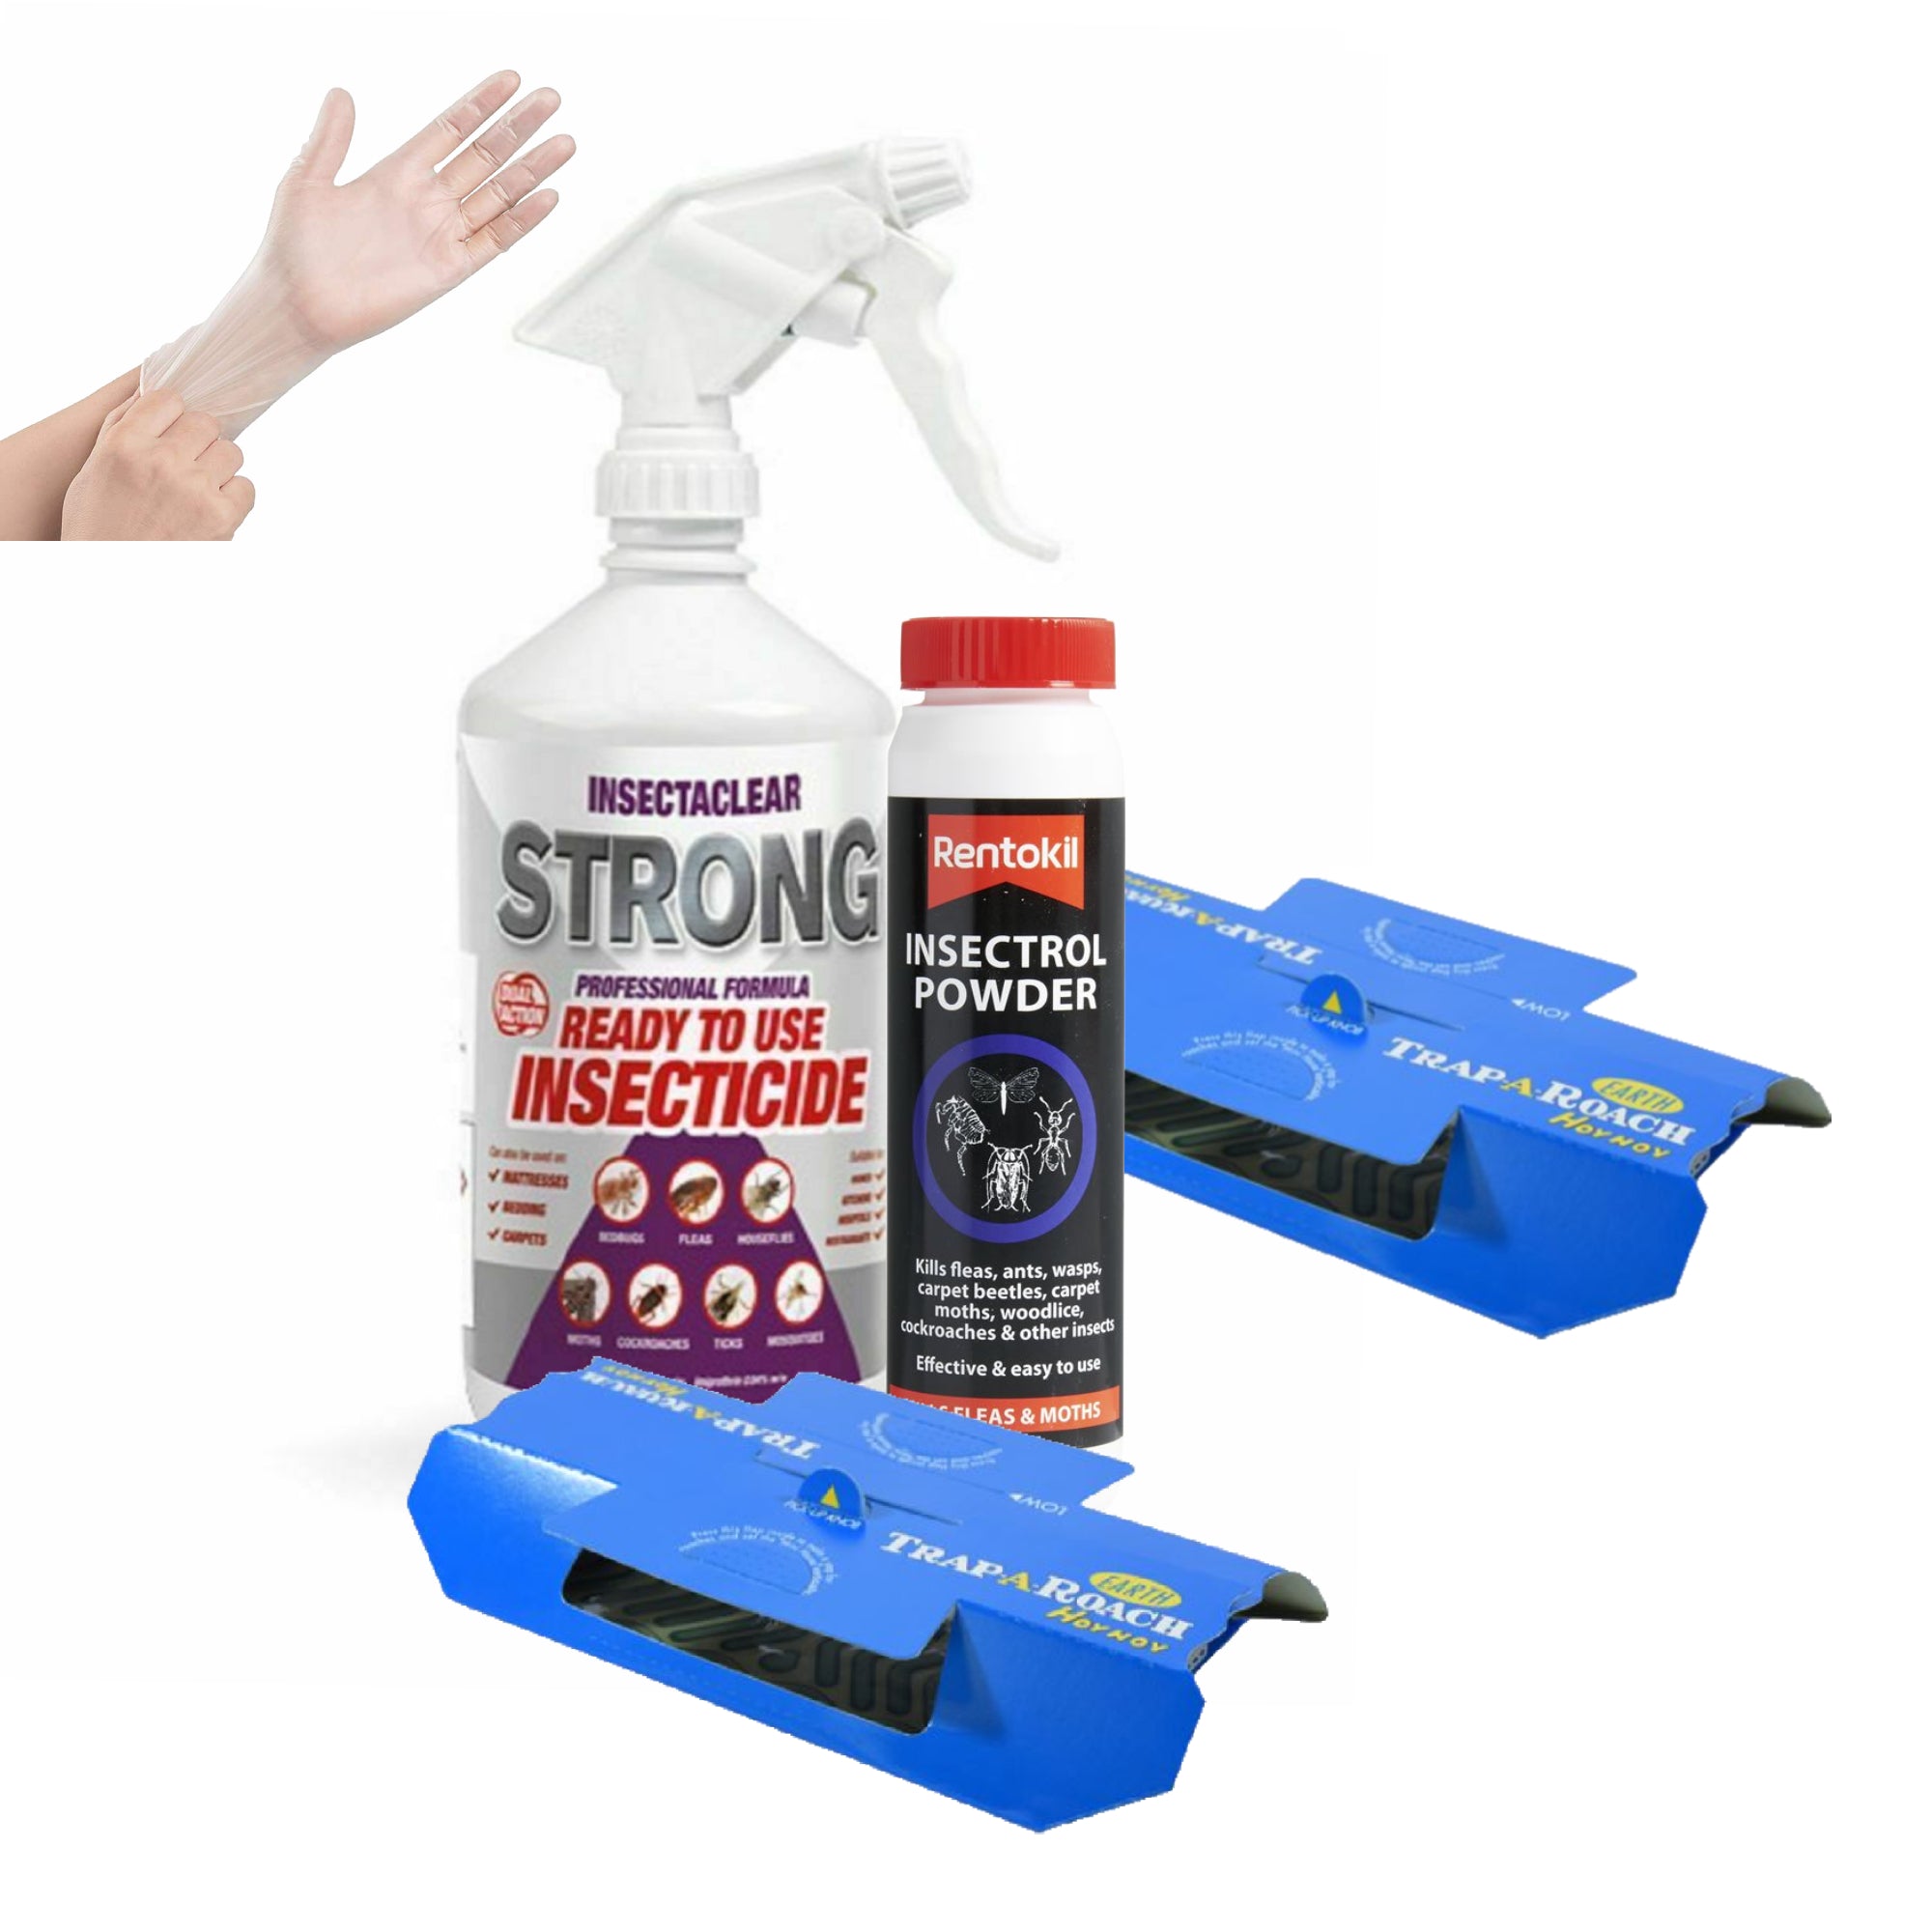 Cockroach Kill and Control Treatment Kit - Moth Control